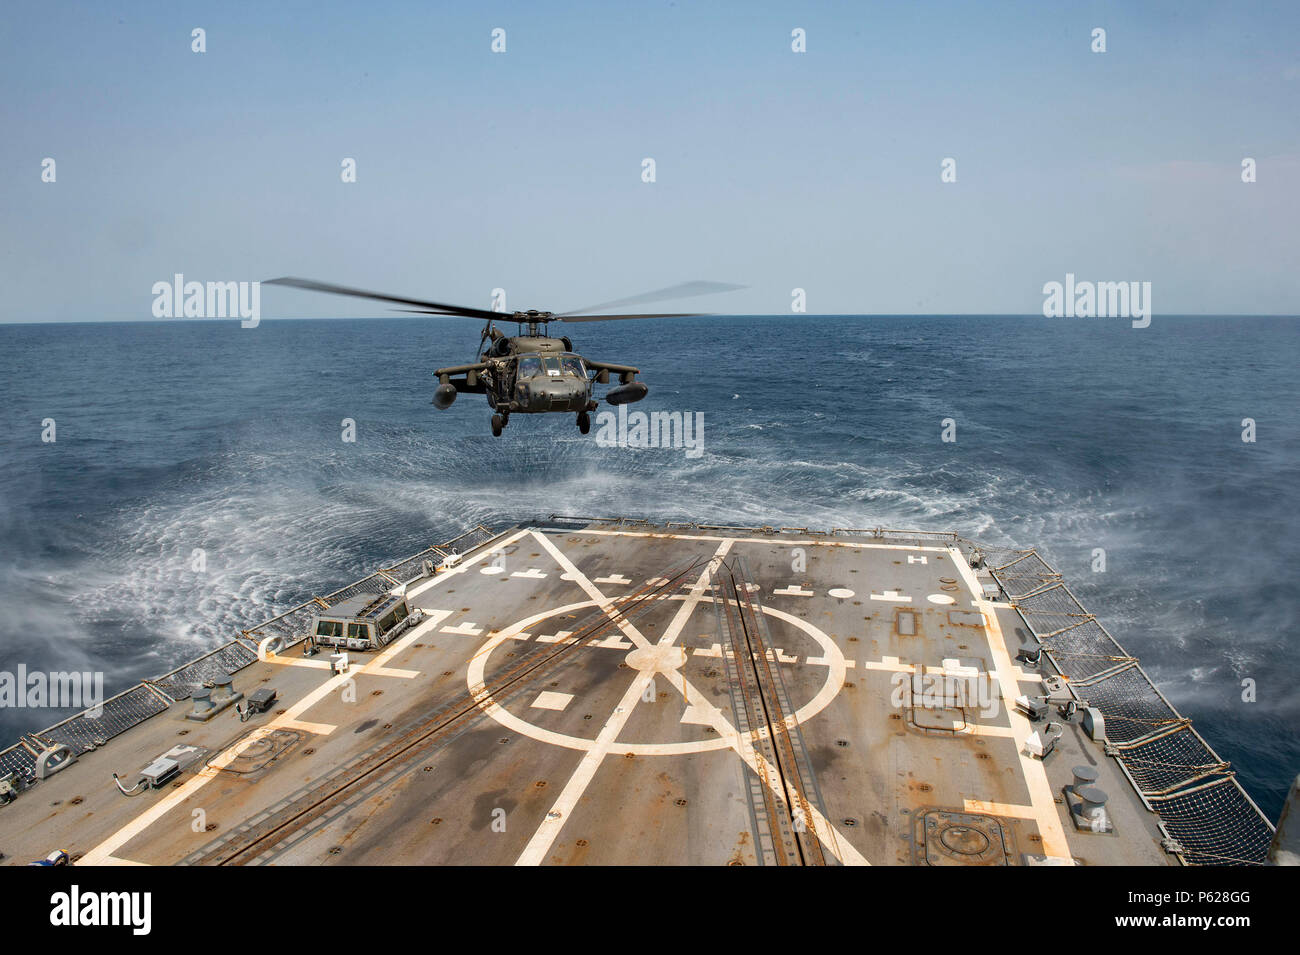 160414-N-MD297-041 PACIFIC OCEAN (April 14, 2016) An Army UH-60 Blackhawk helicopter from the 1st Battalion, 228th Aviation Regiment lands on the flight deck aboard the Arleigh Burke-class guided-missile destroyer USS Lassen (DDG 82) while conducting deck landing qualifications (DLQs). Lassen is currently underway in support of Operation Martillo, a joint operation with the U.S. Coast Guard and partner nations within the 4th Fleet area of responsibility. Operation Martillo is being led by Joint Interagency Task Force South, in support of U.S. Southern Command. (U.S. Navy photo by Mass Communic Stock Photo